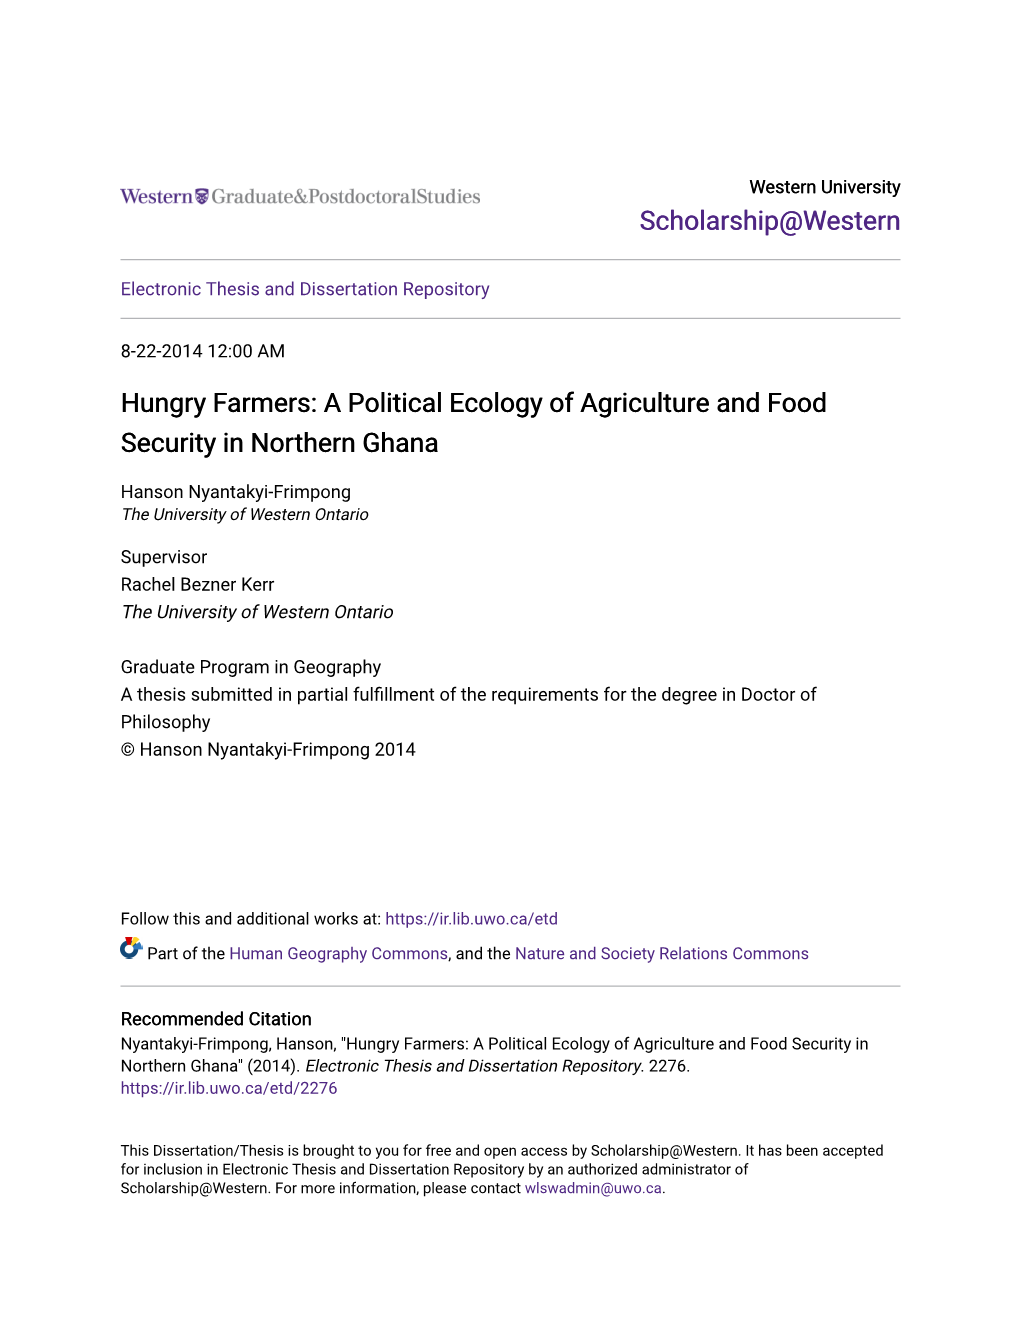 A Political Ecology of Agriculture and Food Security in Northern Ghana